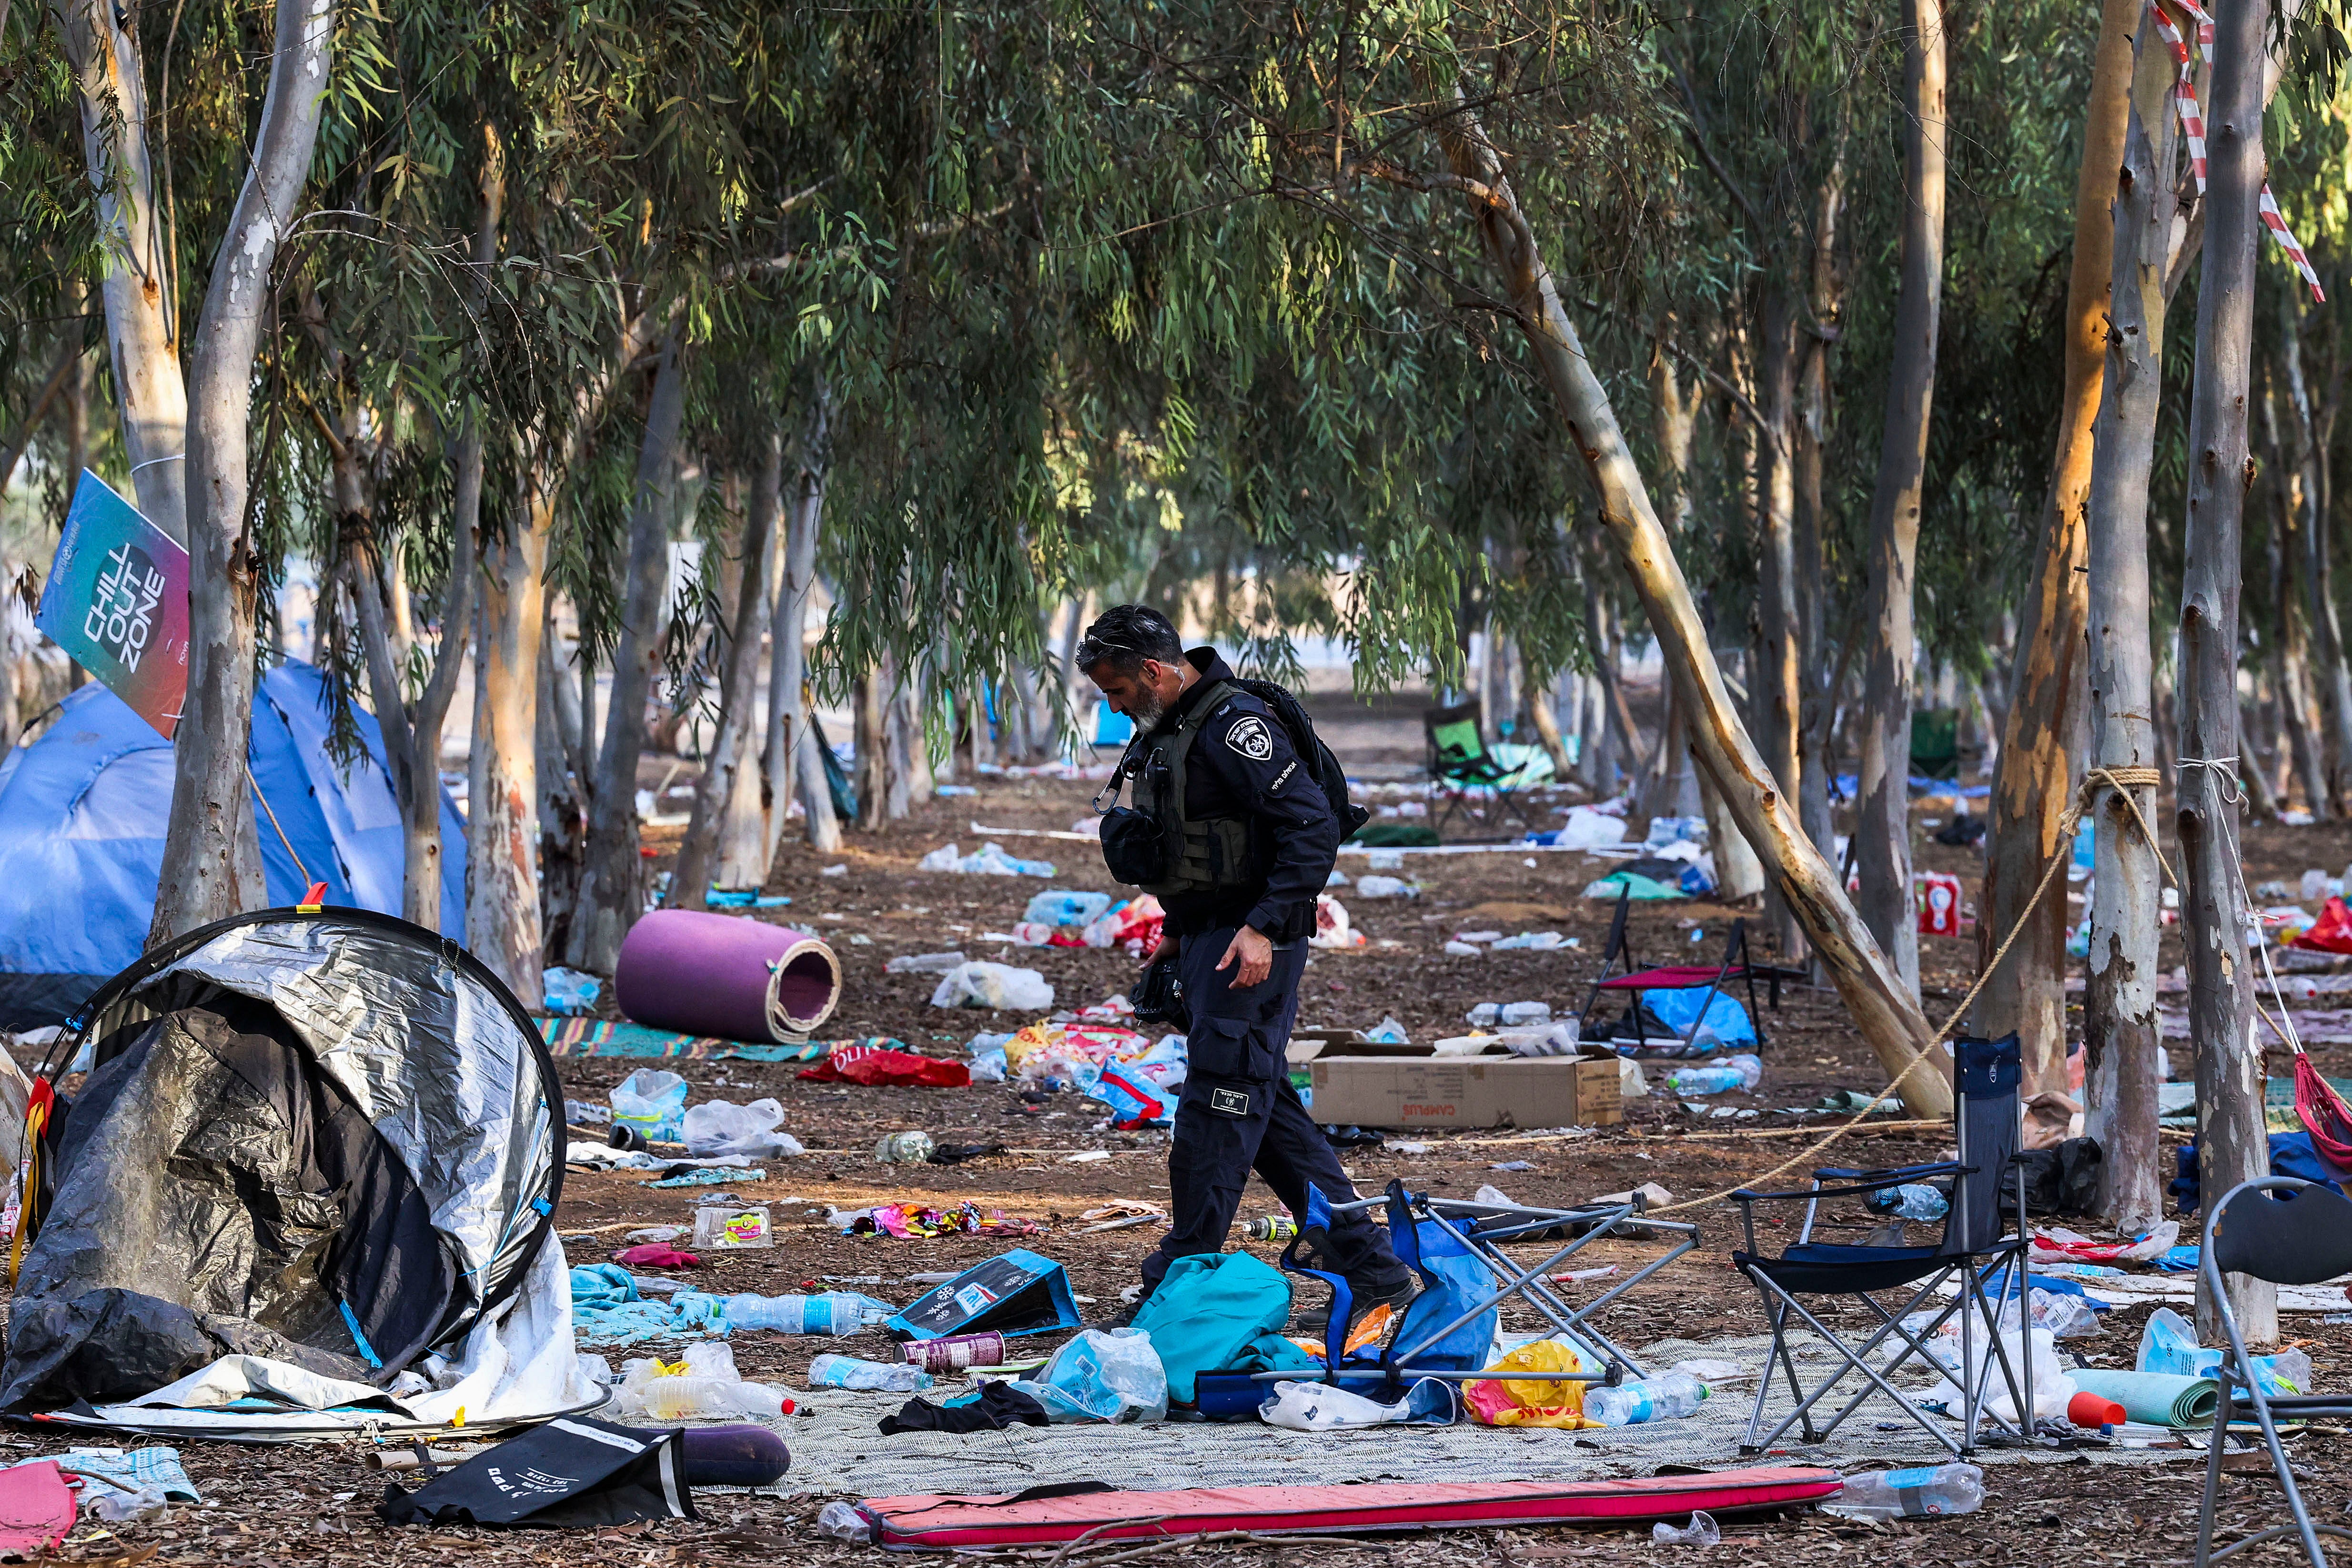 An Israeli officer walks on the ground of the Nova music festival in Re'im, Israel after the event was attacked by Hamas on 7 October